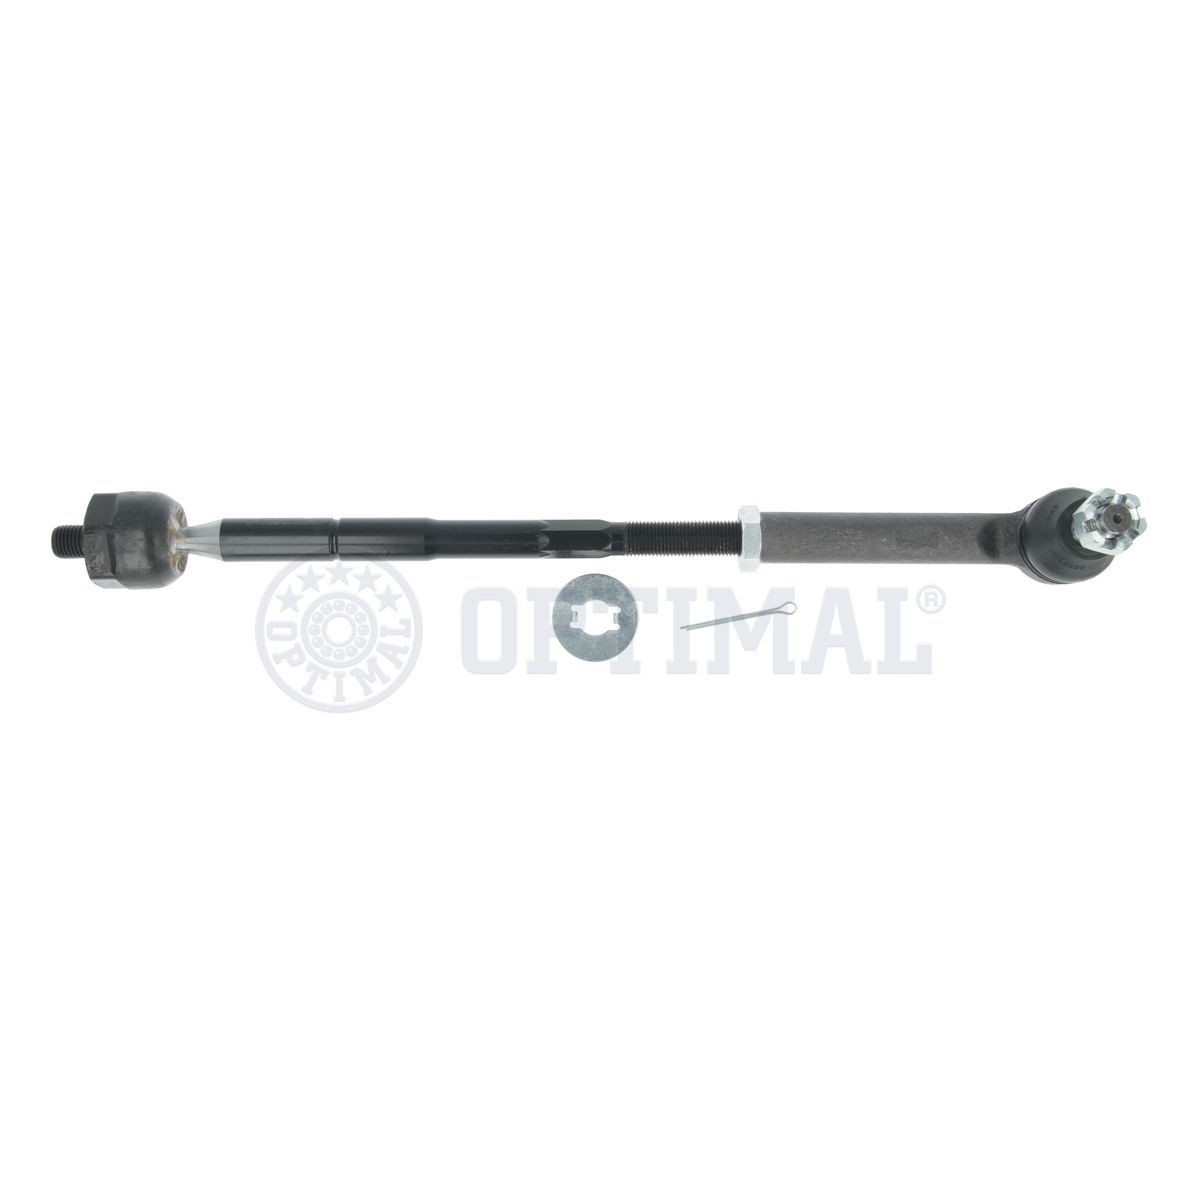 OPTIMAL Front Axle Left, Front Axle Right, with accessories, with Split Pin, with locking plate, with crown nut Cone Size: 14,7mm, Length: 363mm Tie Rod G0-790 buy